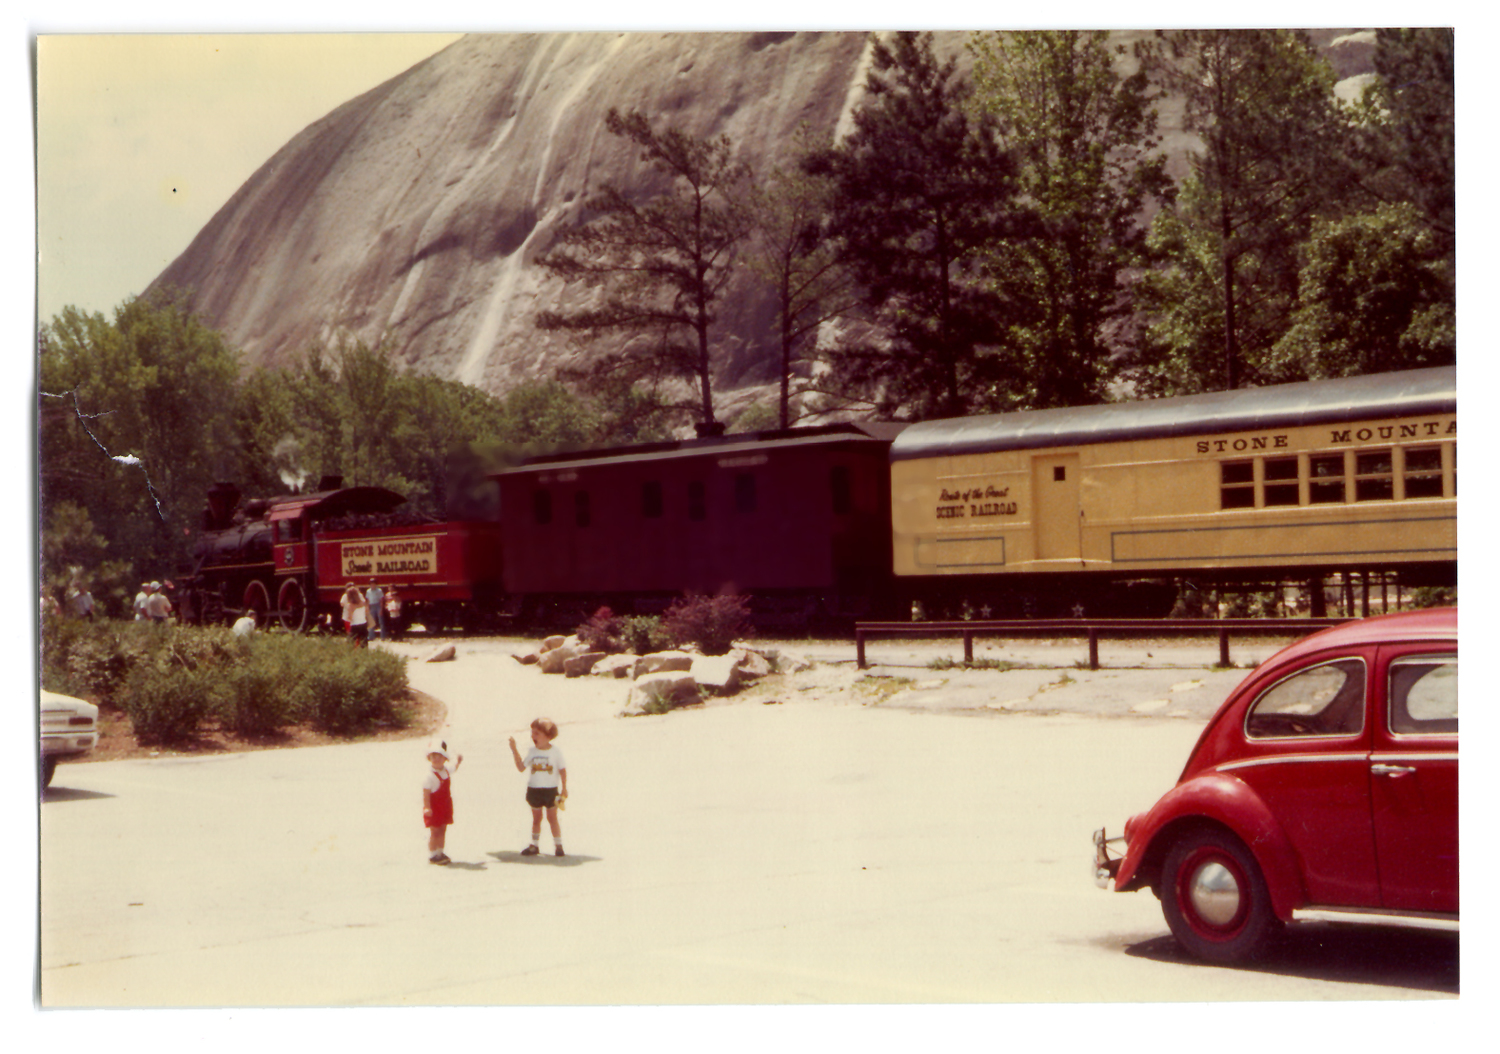 A photograph from the 1970s with two children standing in front of a passing train with part of a red Volkswagen bug in the foreground and mountains in the distance. 